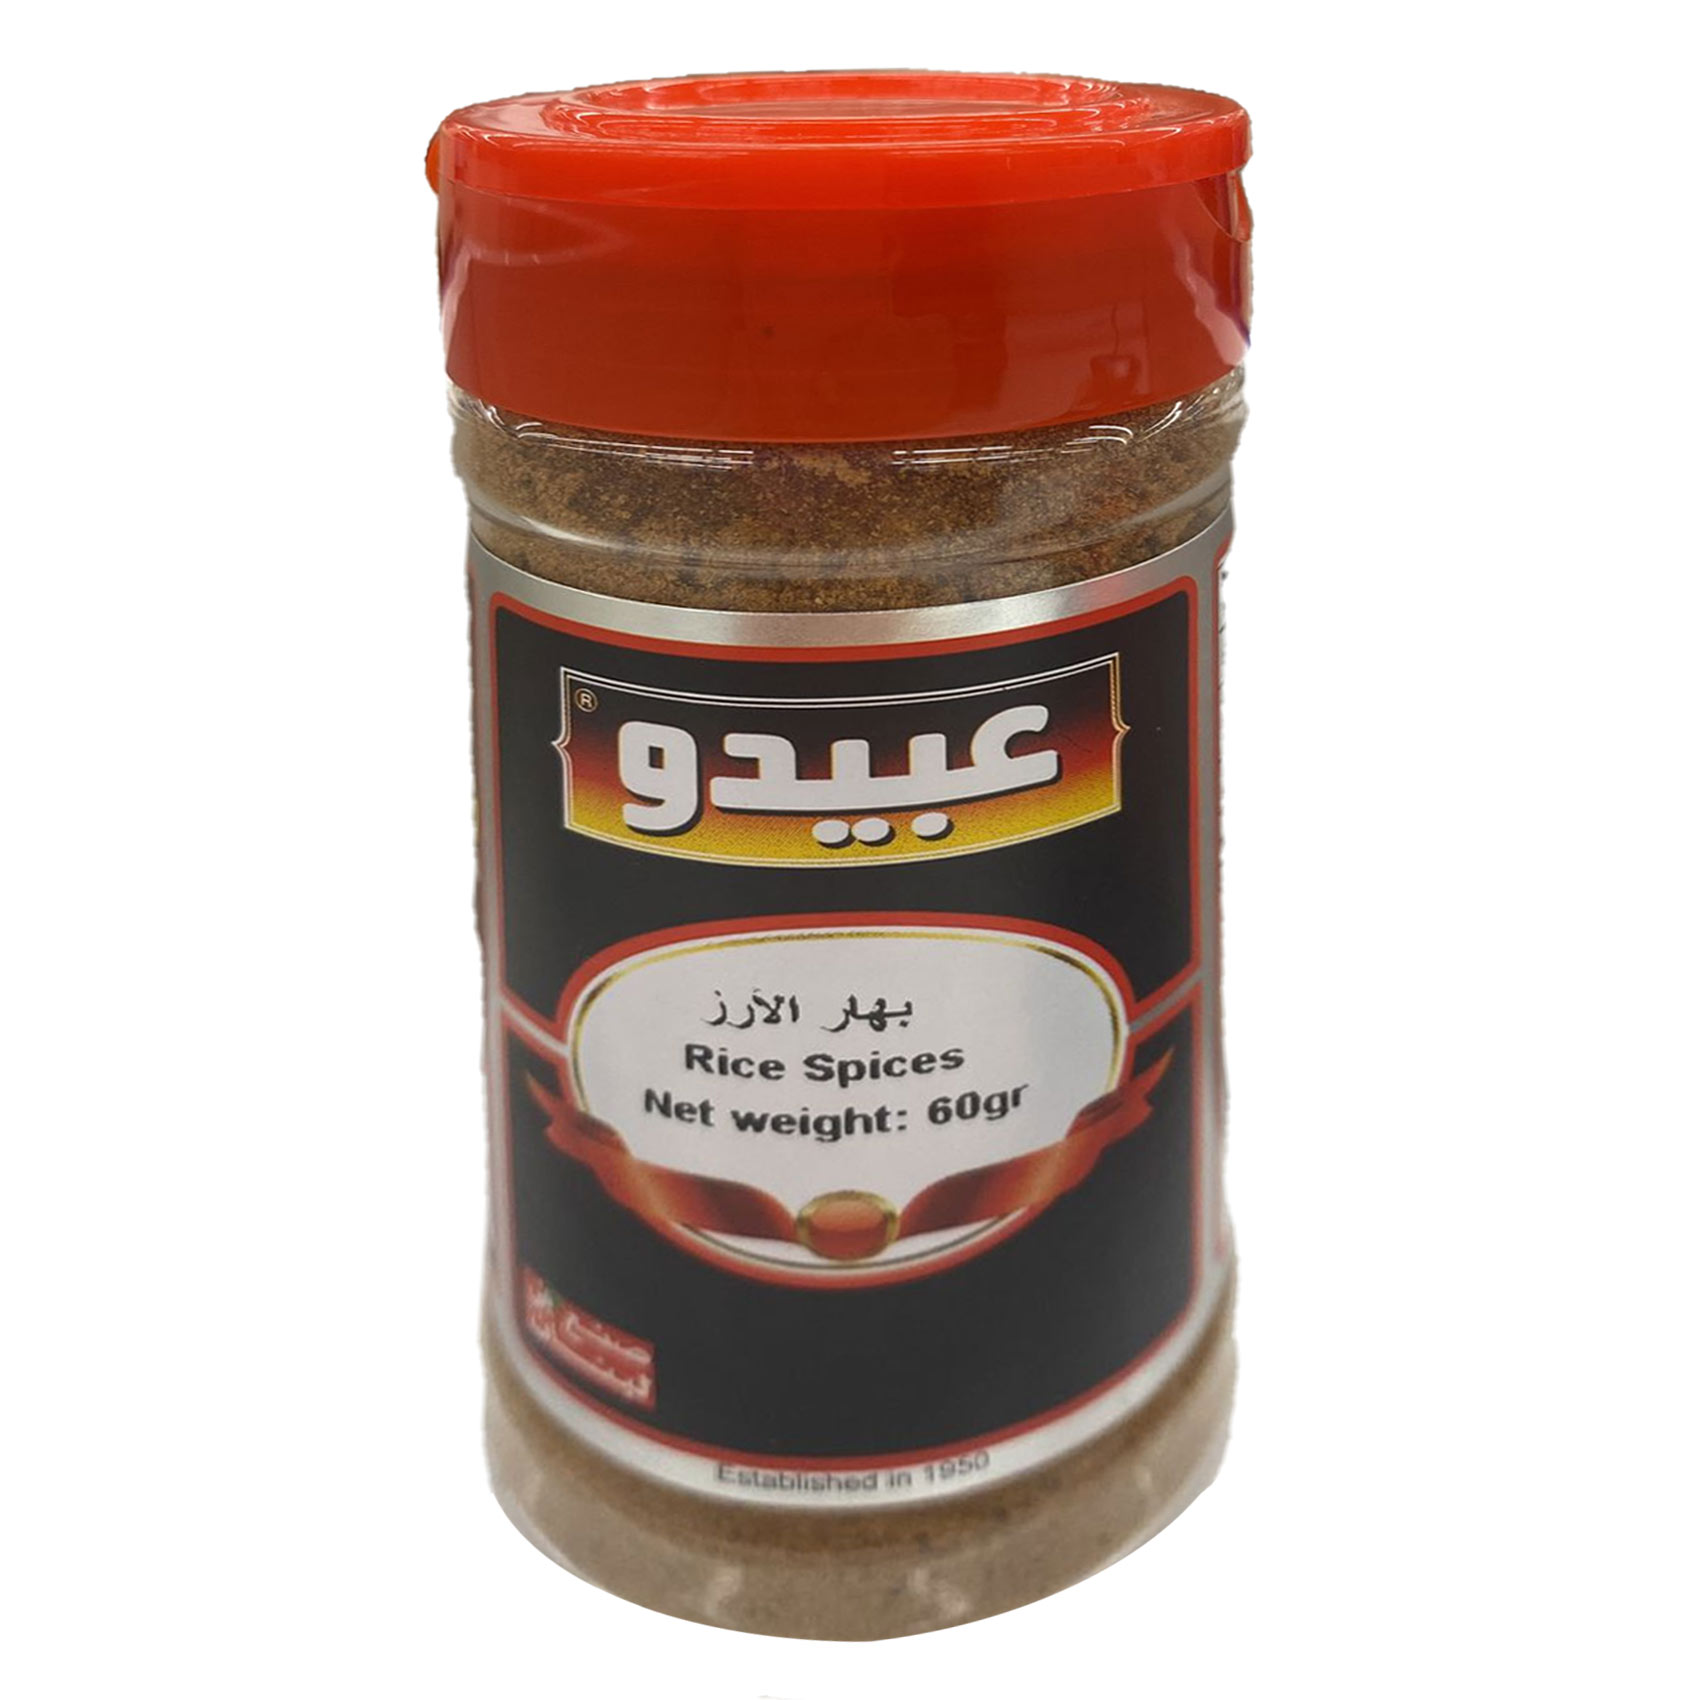 Abido Grinded Rice Spices 60g